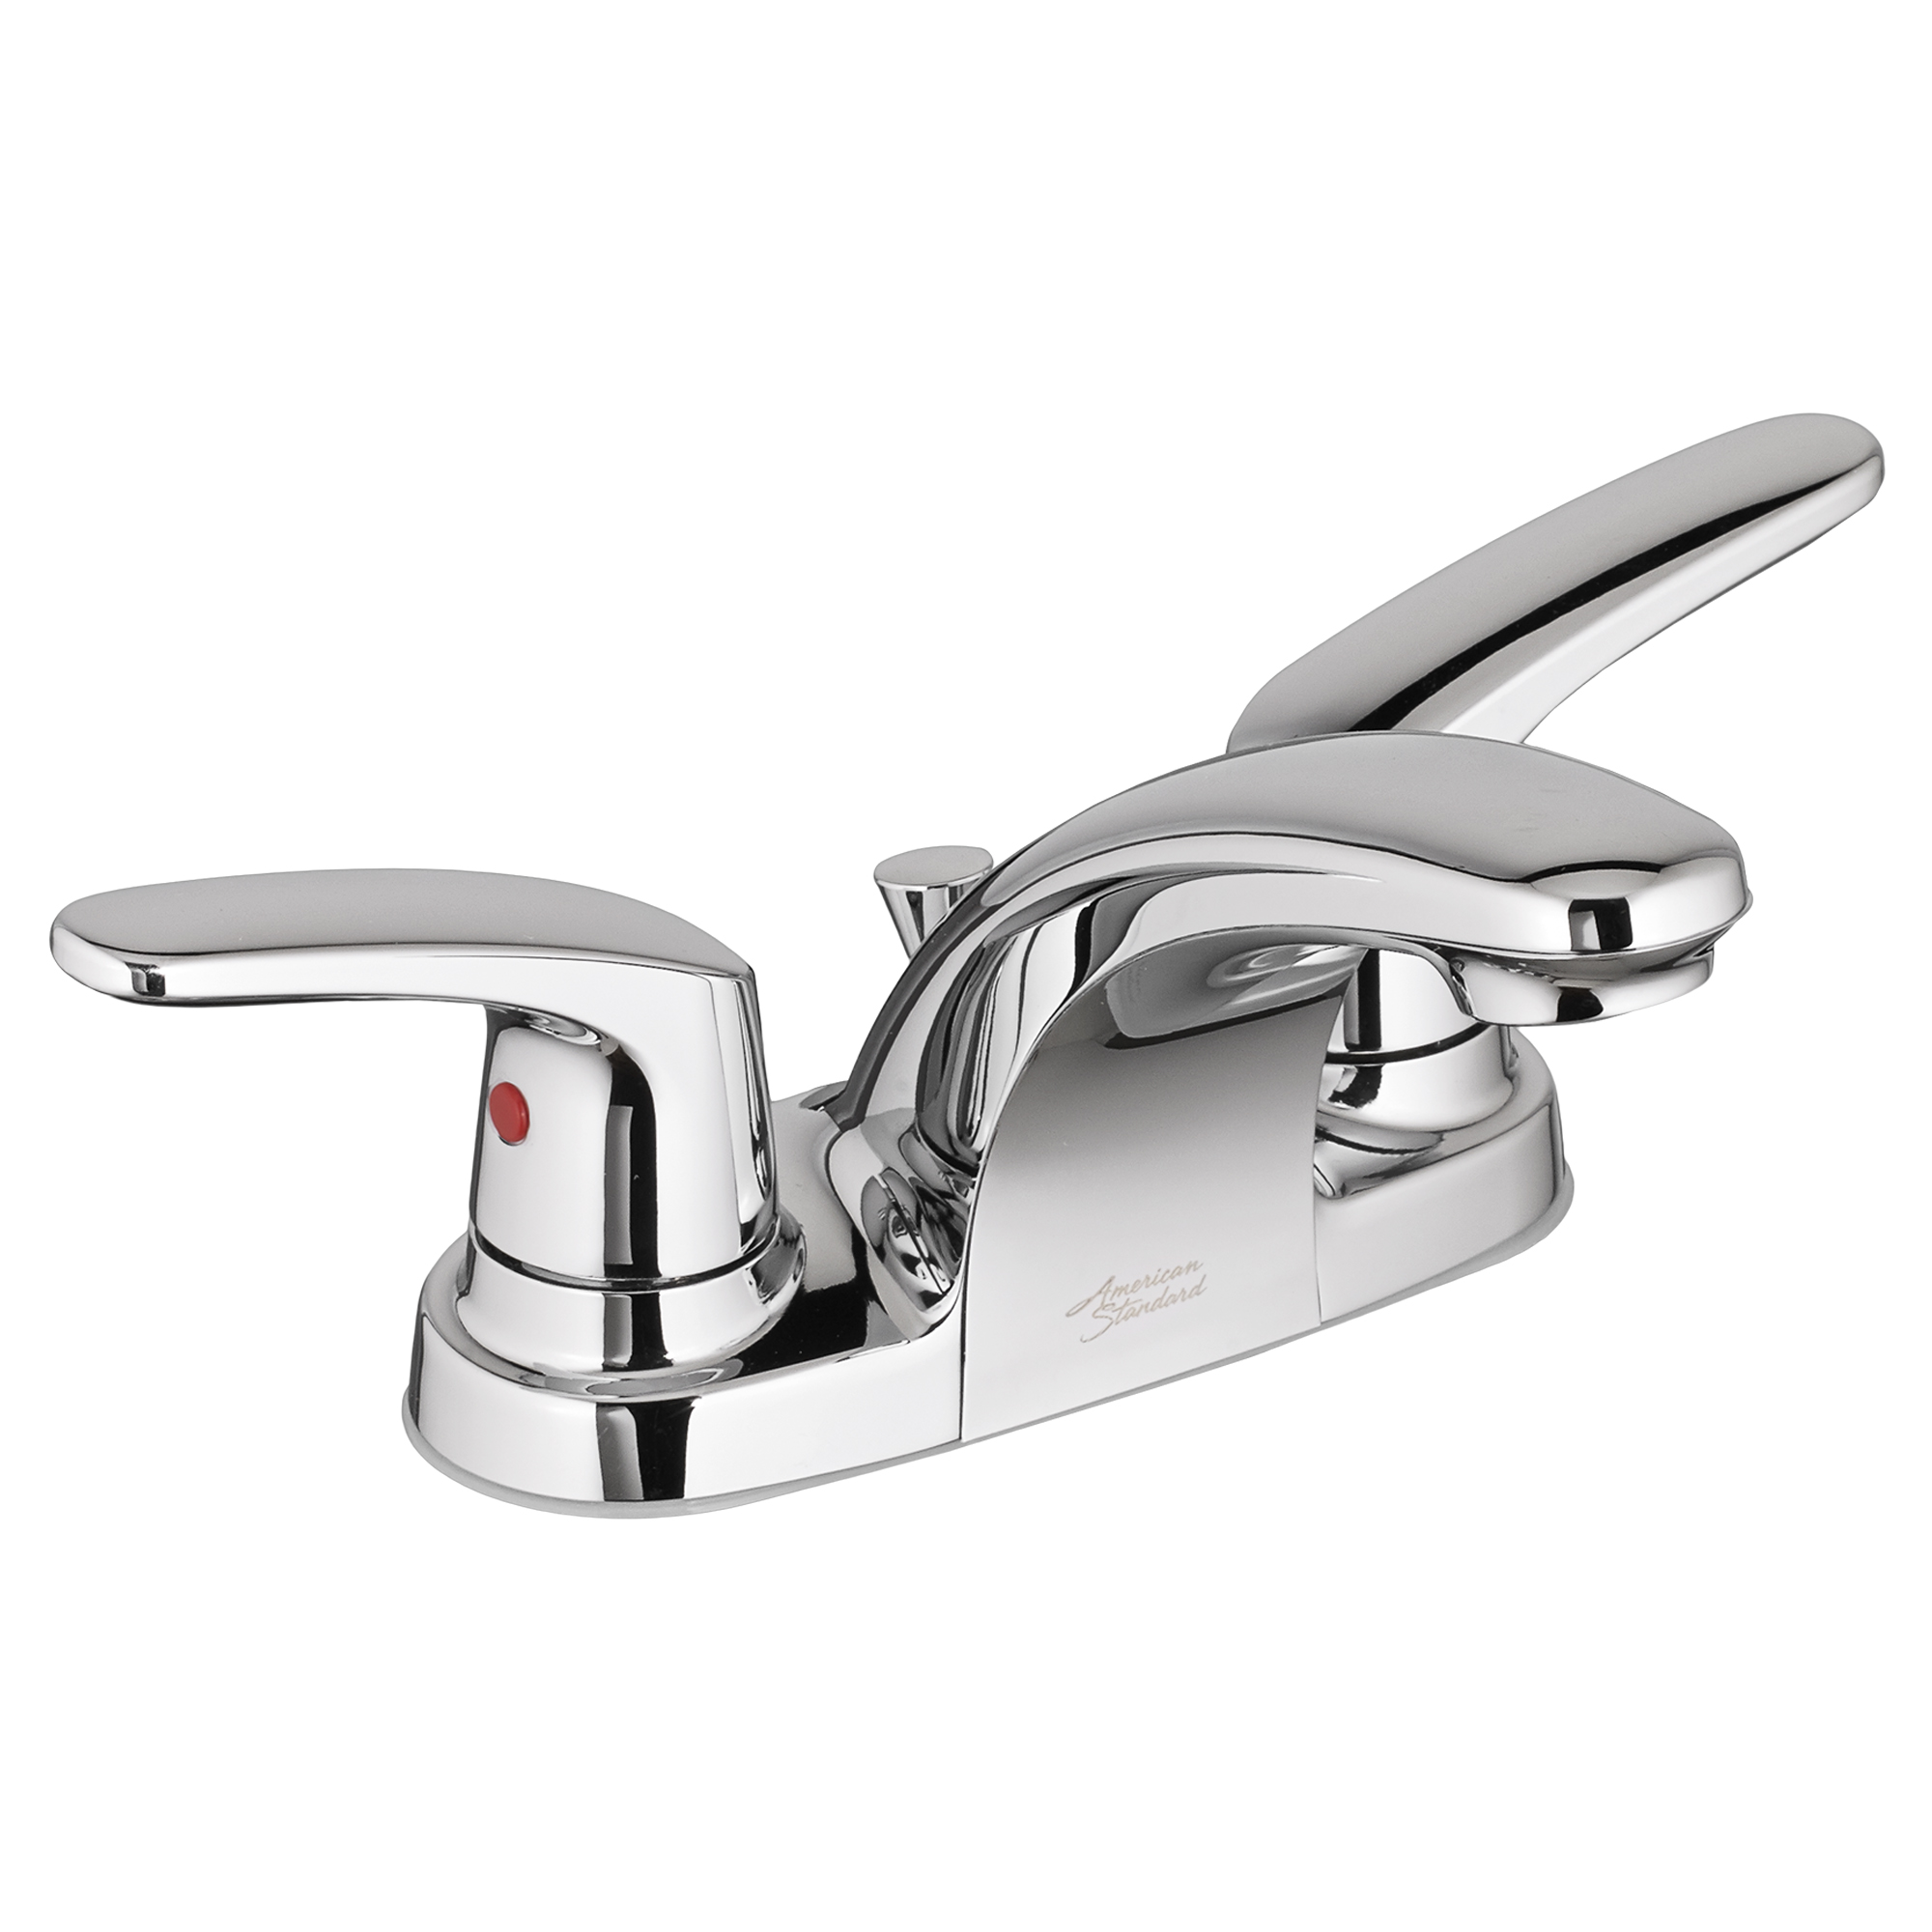 Colony® PRO 4-Inch Centerset 2-Handle Bathroom Faucet 1.2 gpm/4.5 Lpm With Lever Handles